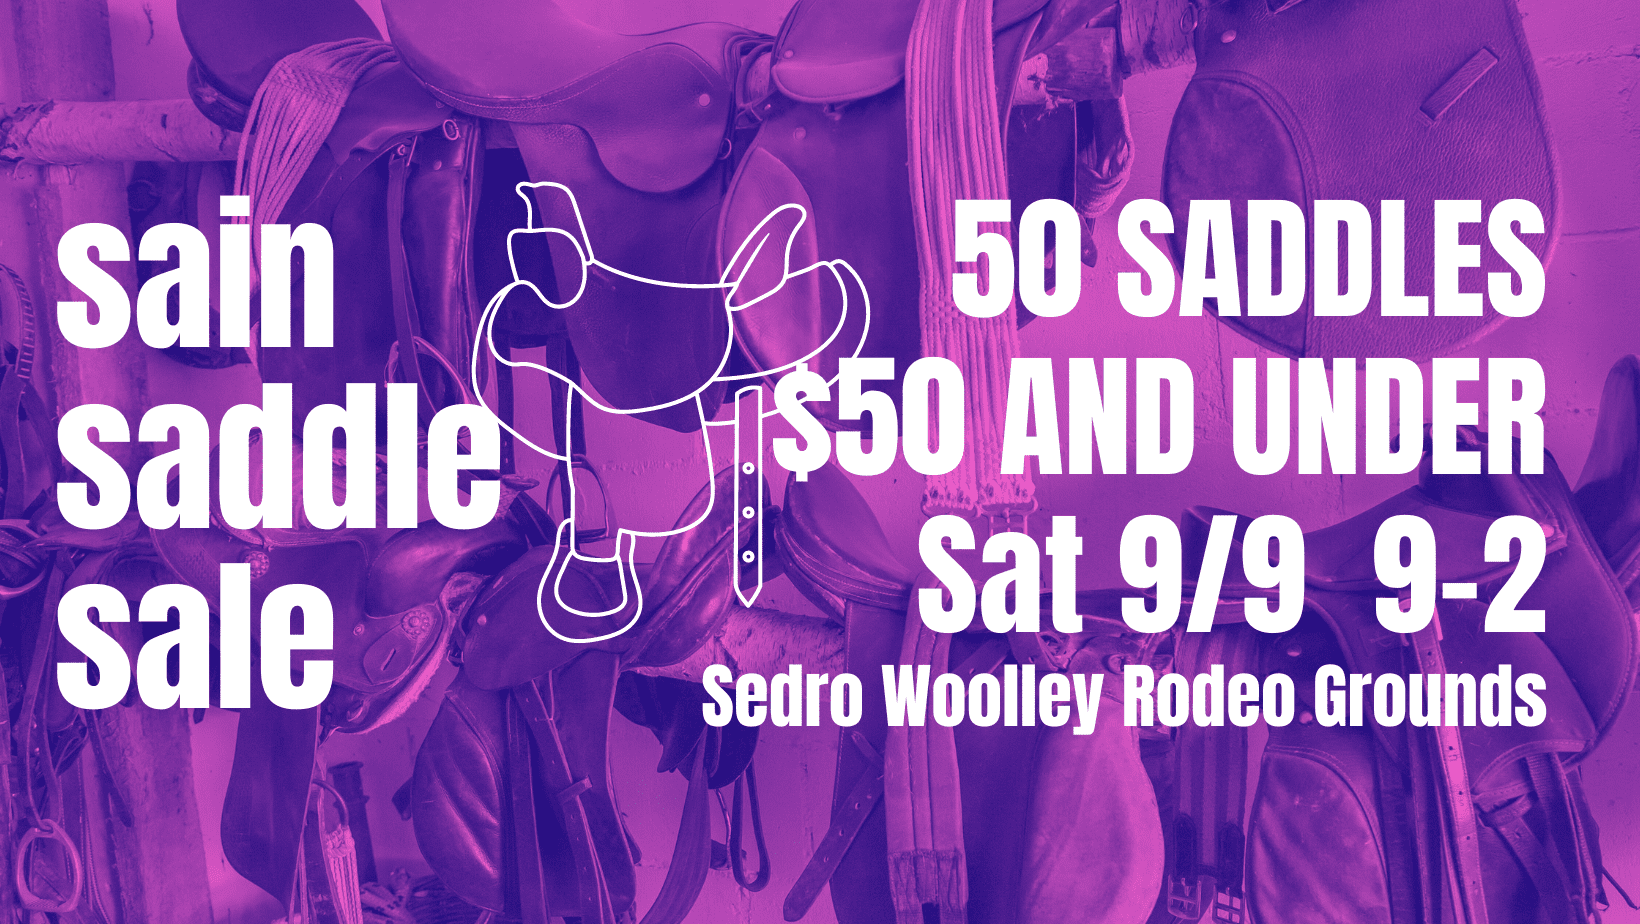 saddle sale tack sale sedro woolley rodeo grounds